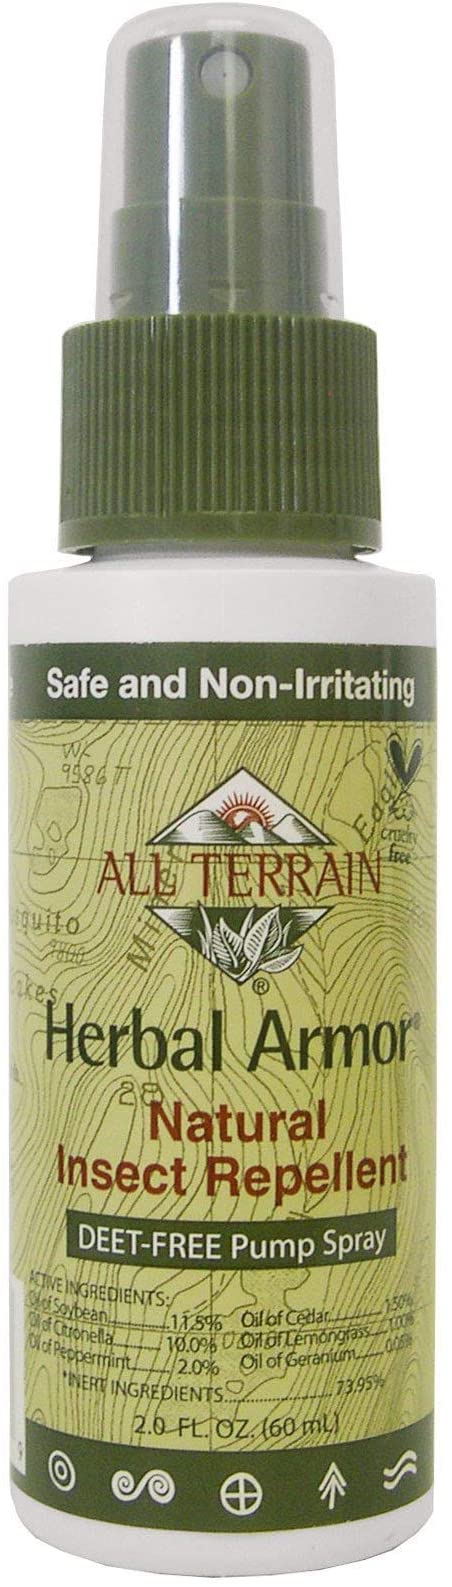 Herbal Armor Insect Repellent - Spray, 2 oz (Pack of 3)